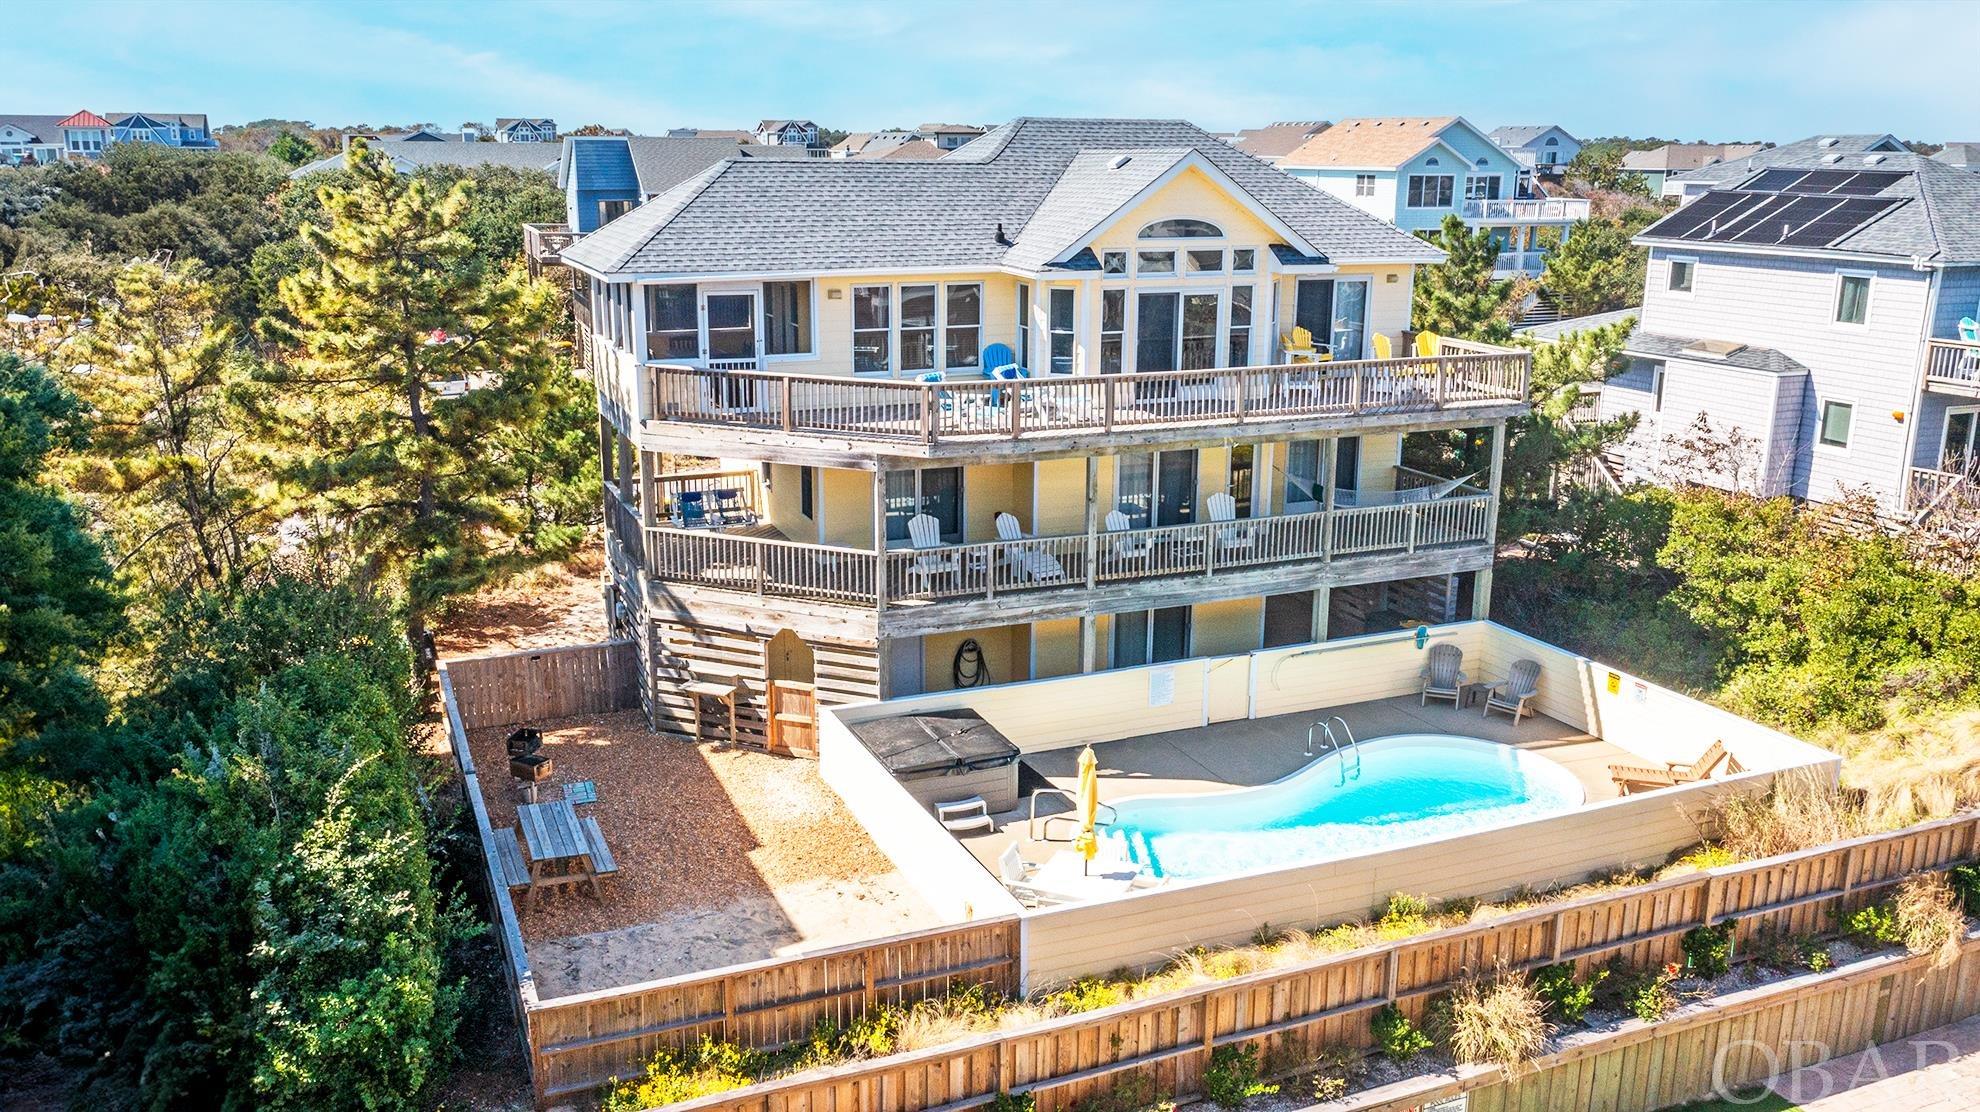 Welcome to Seaduction! Ocean views and easy beach access is what helps make this location so desirable.  The reverse floor plan is designed to entertain. Ground floor has a bathroom, bedroom and the game room with pool table and entertainment all with easy access to the 14x30 pool and hot tub.  Don't forget the added fenced in area for children to play and picnic. The midlevel harbors most of the bedrooms with awesome decor that feeds the beach vacation feel! Deck with hammock and chairs to relax overlooking the pool area. Top floor with cathedral ceilings has open kitchen area with dining that opens to the screened in deck to expand the eating area. Living area with the open feel from all of the natural light glowing through the windows. Seaduction is the home to repeat renters each year!  Excellent care has been provided to this fun vacation home. Come See!